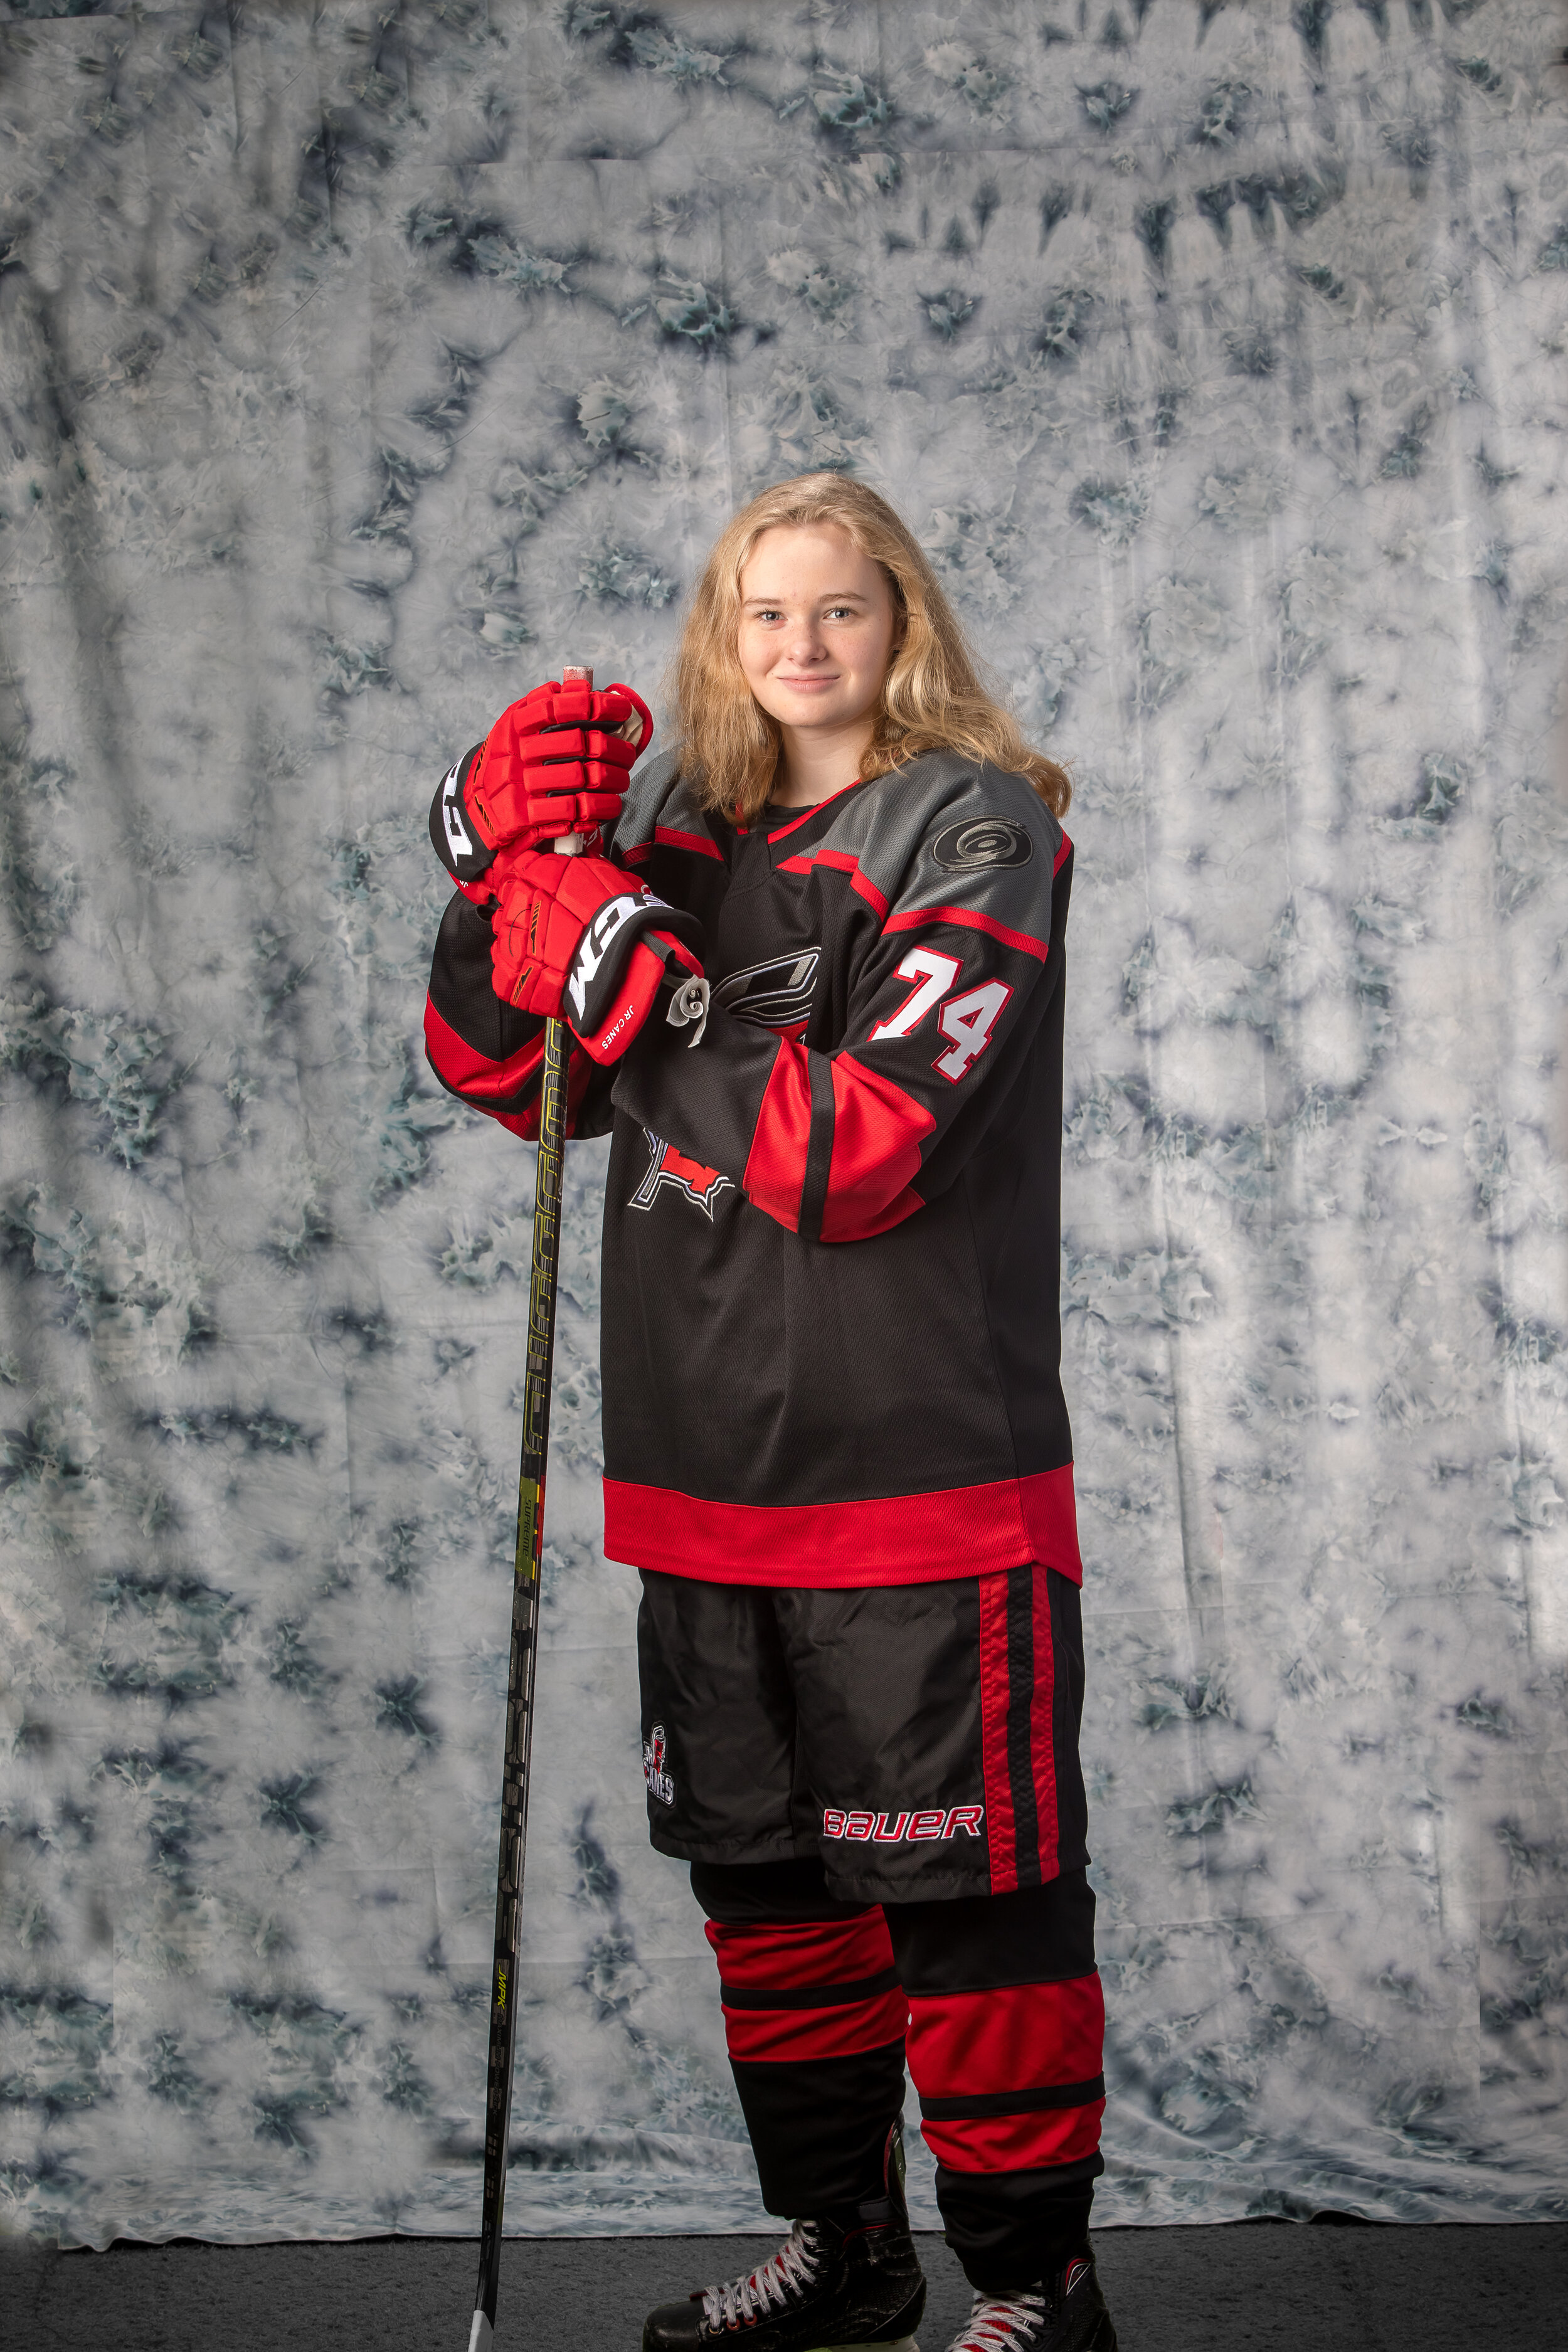 Kids Canes: Hockey Positions With The Most Junior Hurricanes Reporter